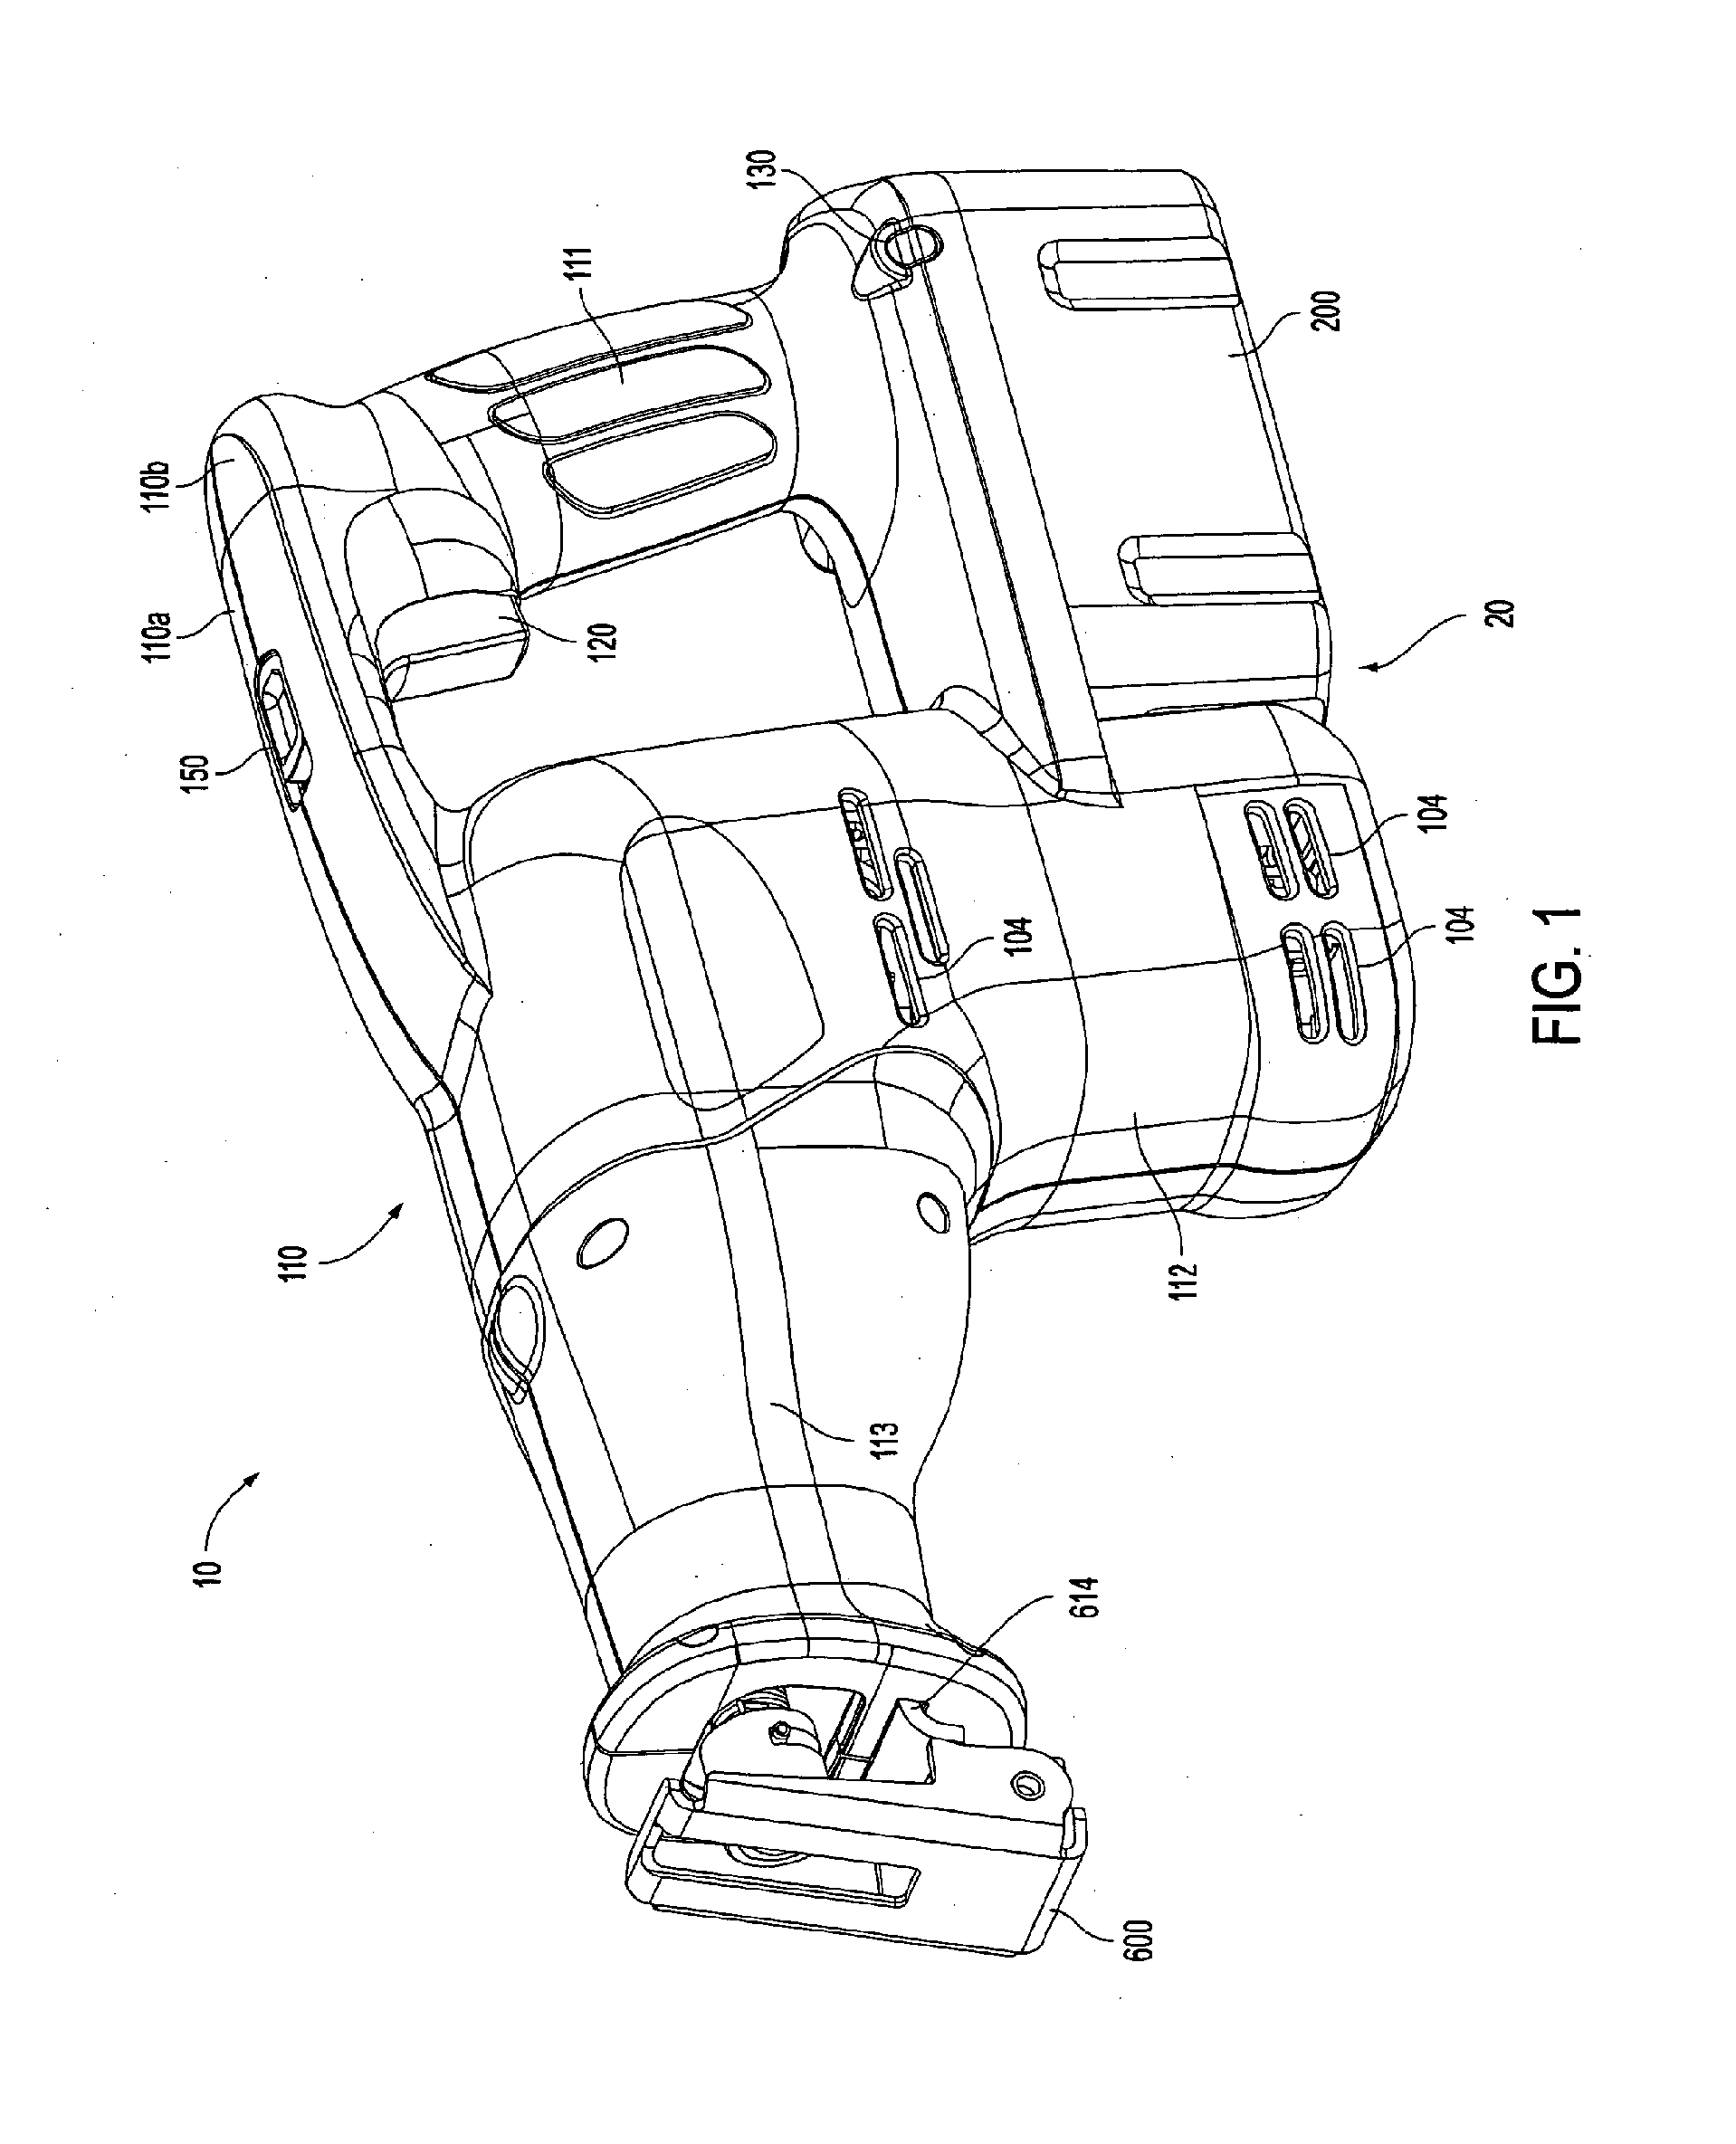 Bearing structure for a reciprocating shaft in a reciprocating saw